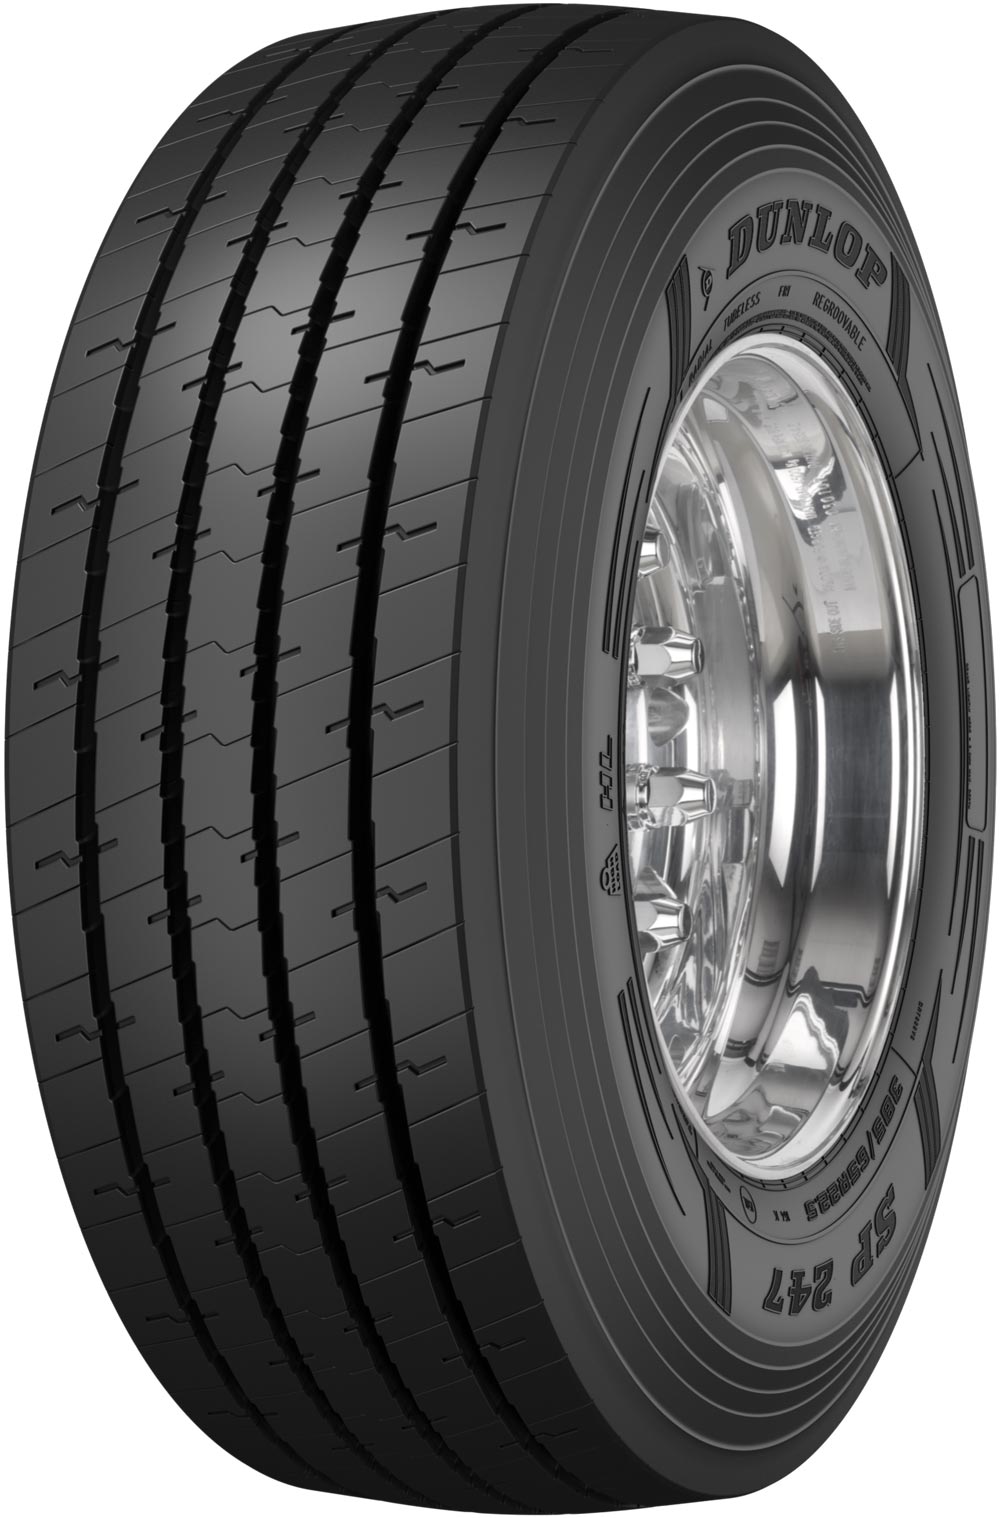 product_type-heavy_tires DUNLOP SP247 385/65 R22.5 K